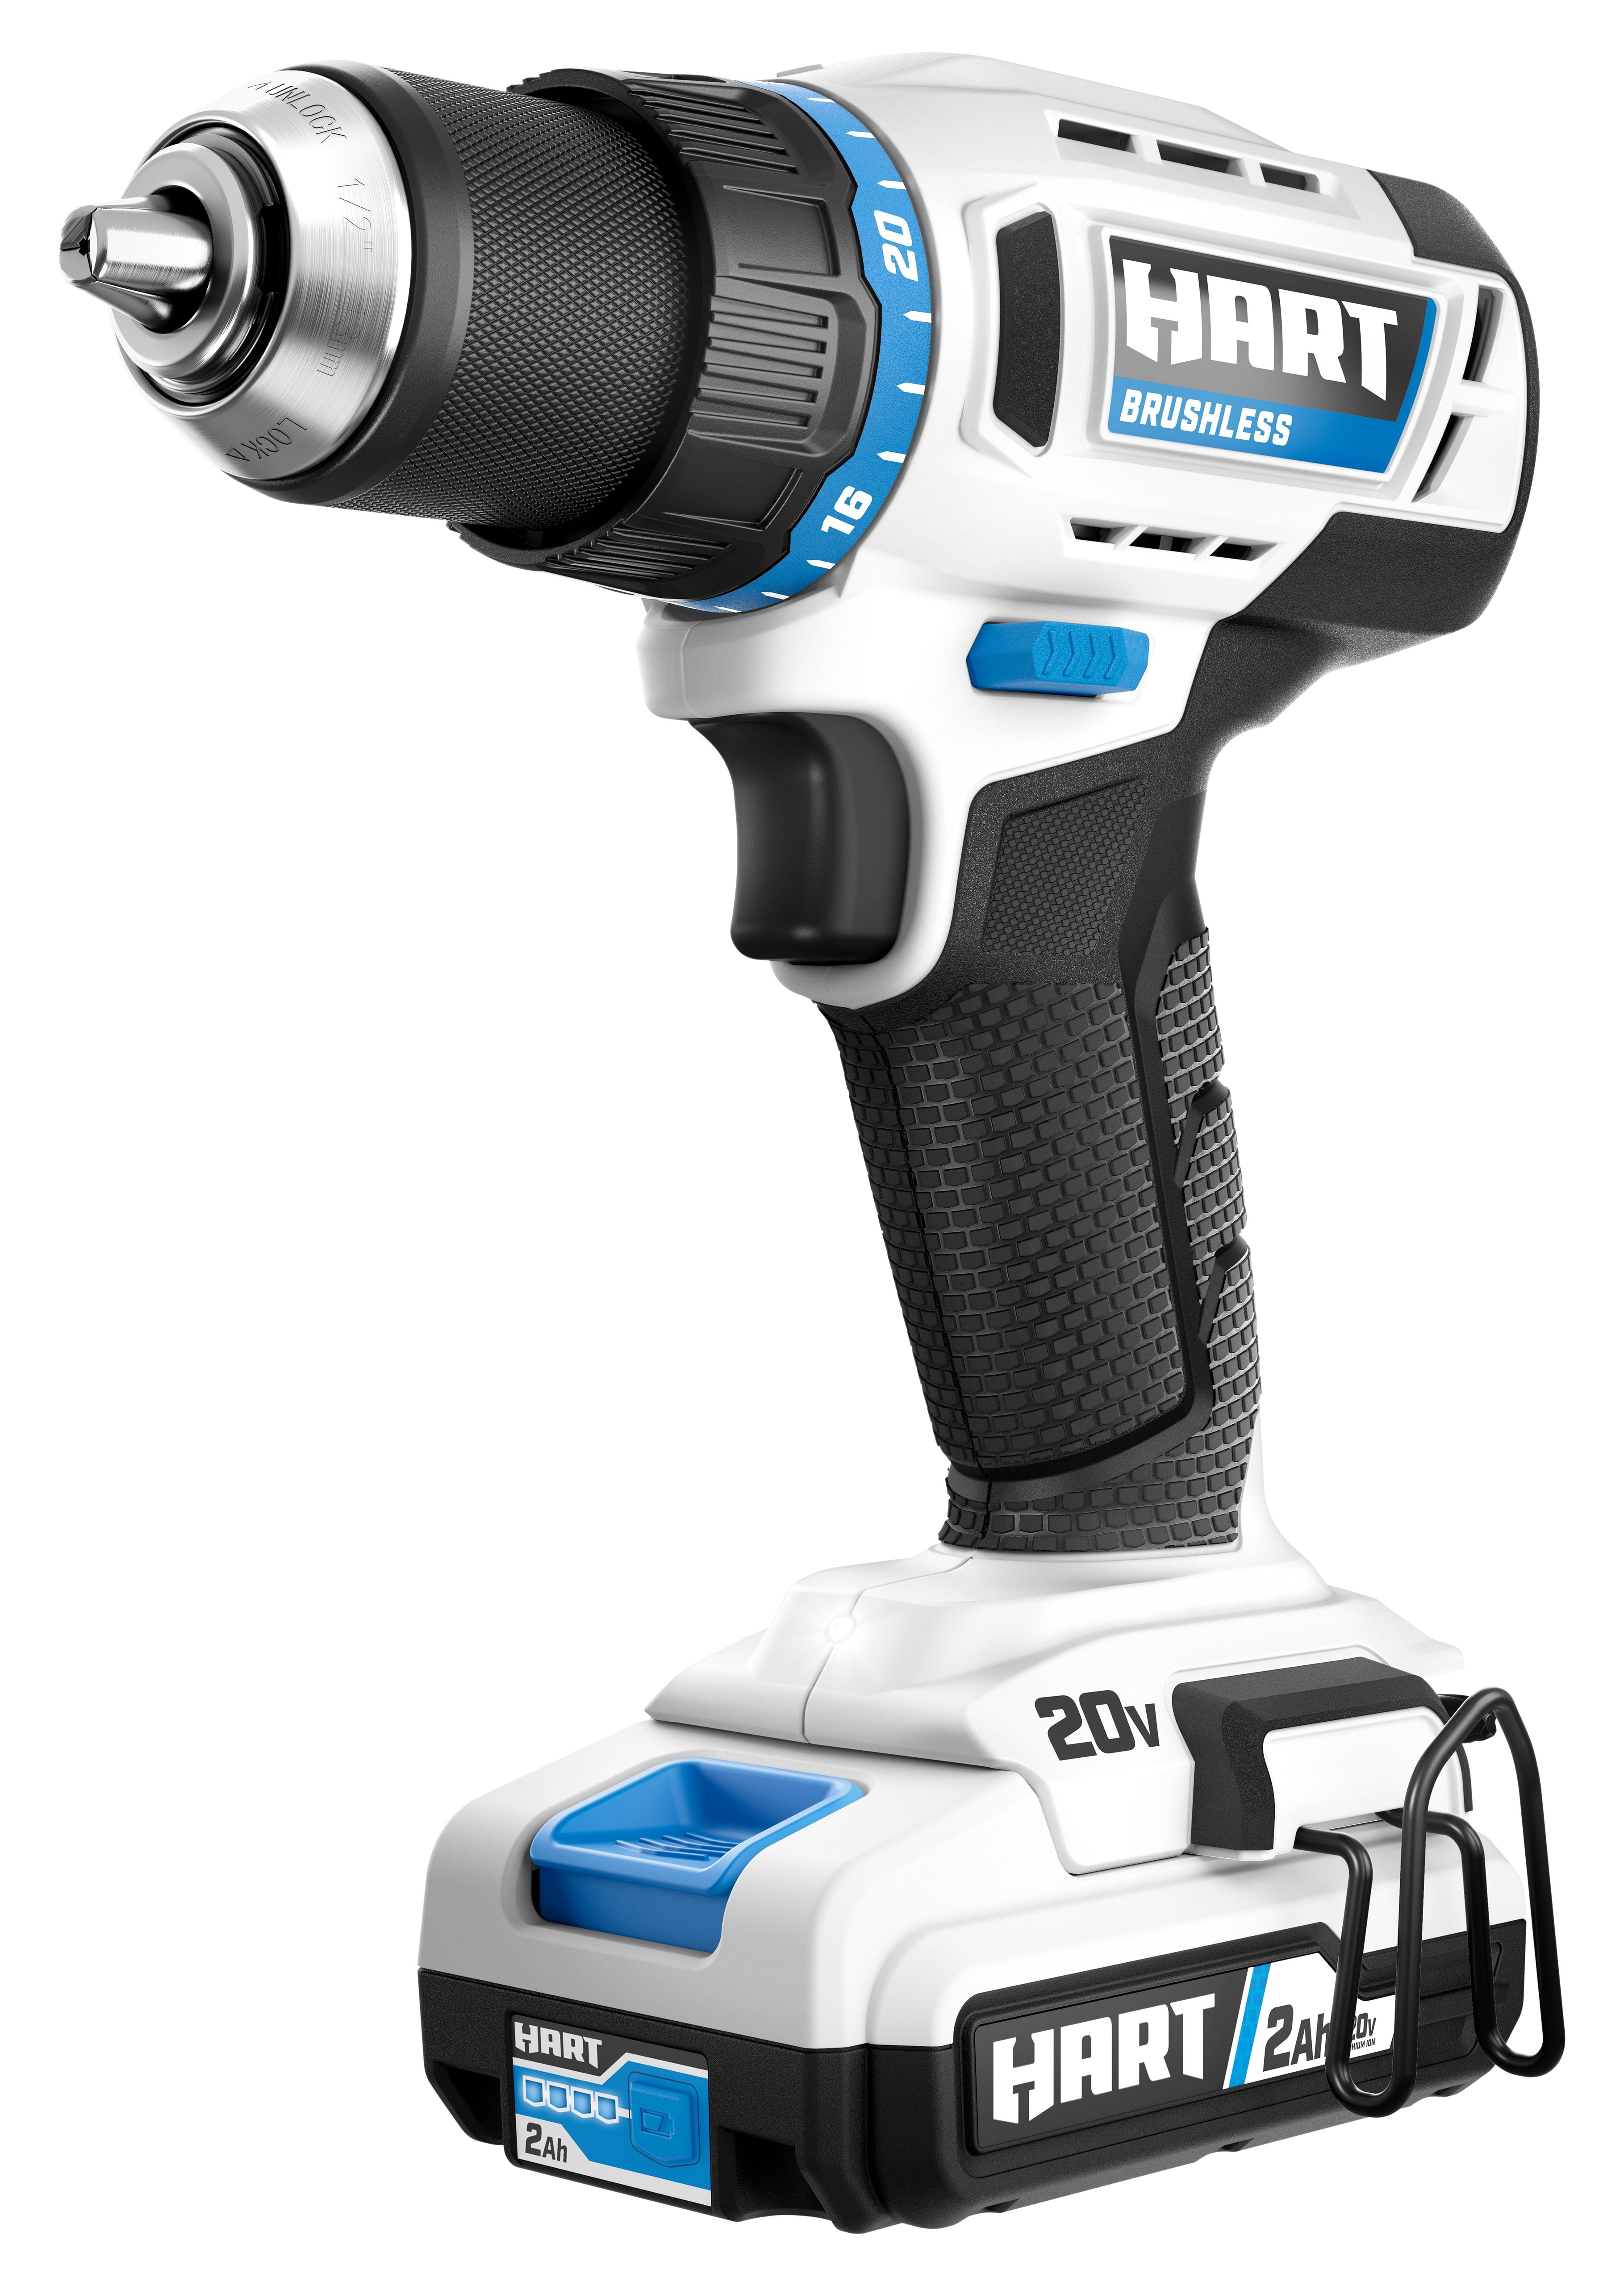 HART 20-Volt Brushless 1/2-inch Drill/Driver Kit, (1) 2.0Ah Lithium-Ion Battery, Gen 2